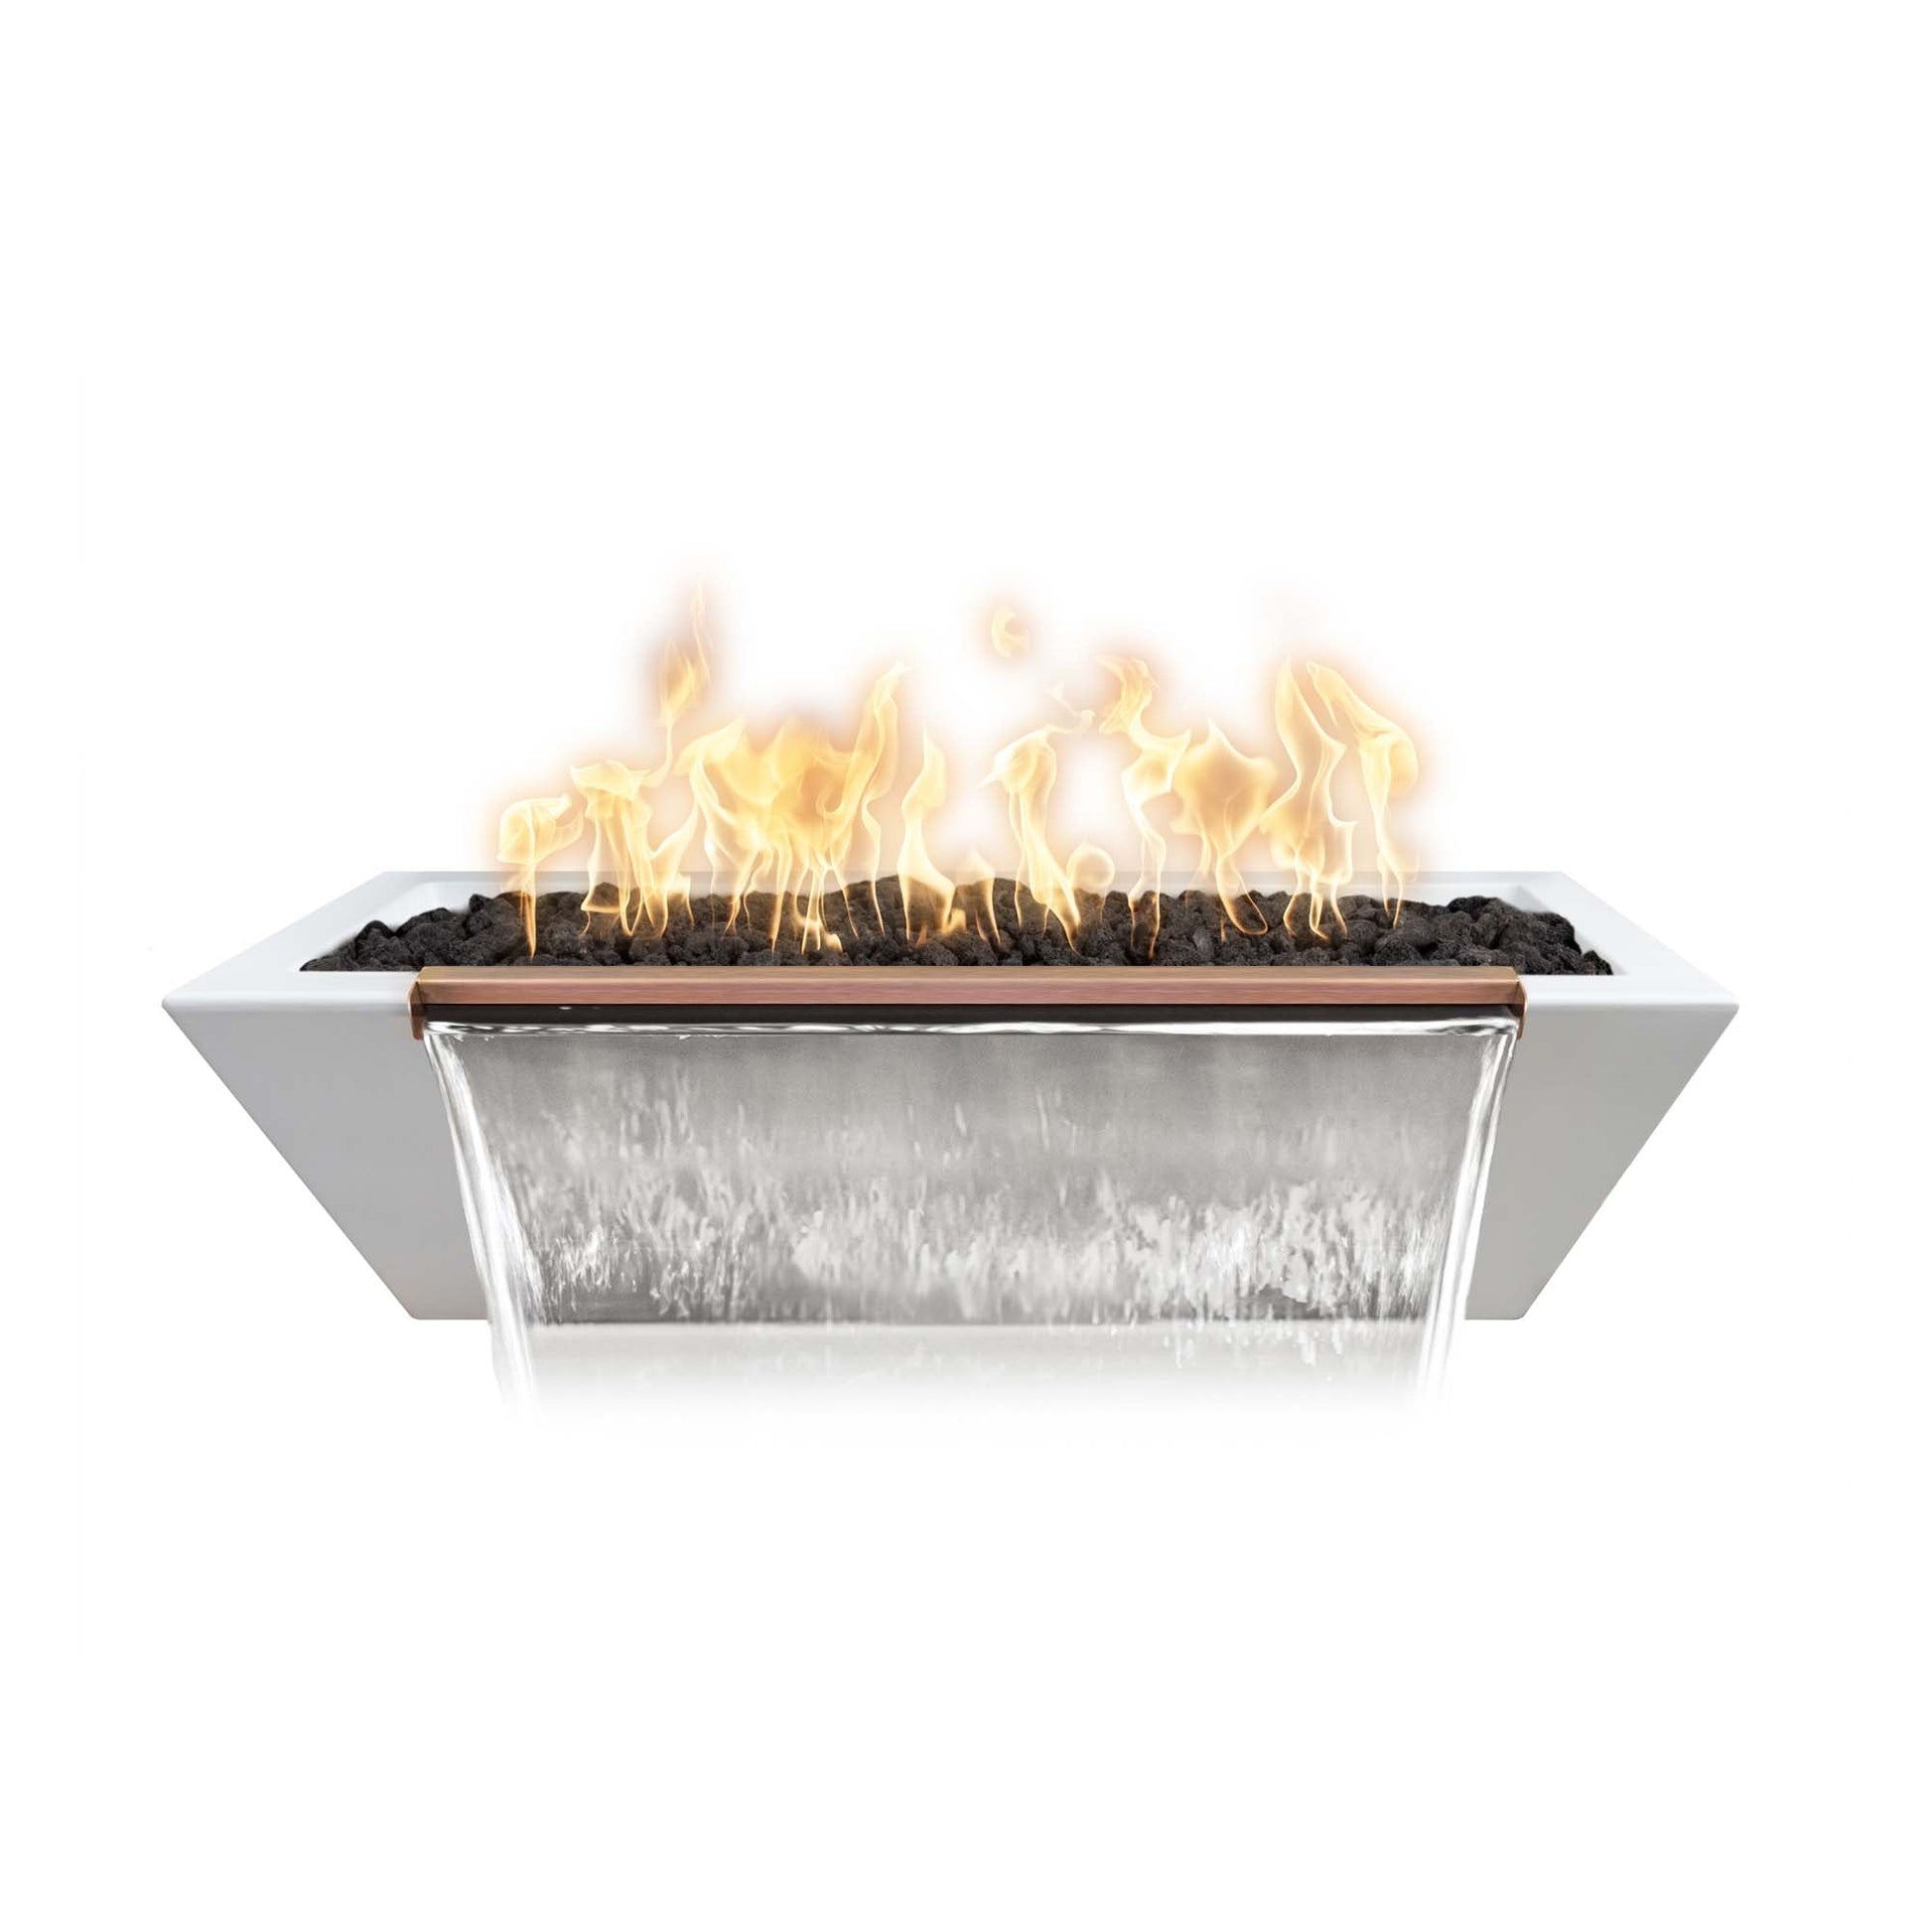 The Outdoor Plus Linear Maya 60" Natural Gray GFRC Concrete Liquid Propane Fire & Water Bowl with Match Lit Ignition